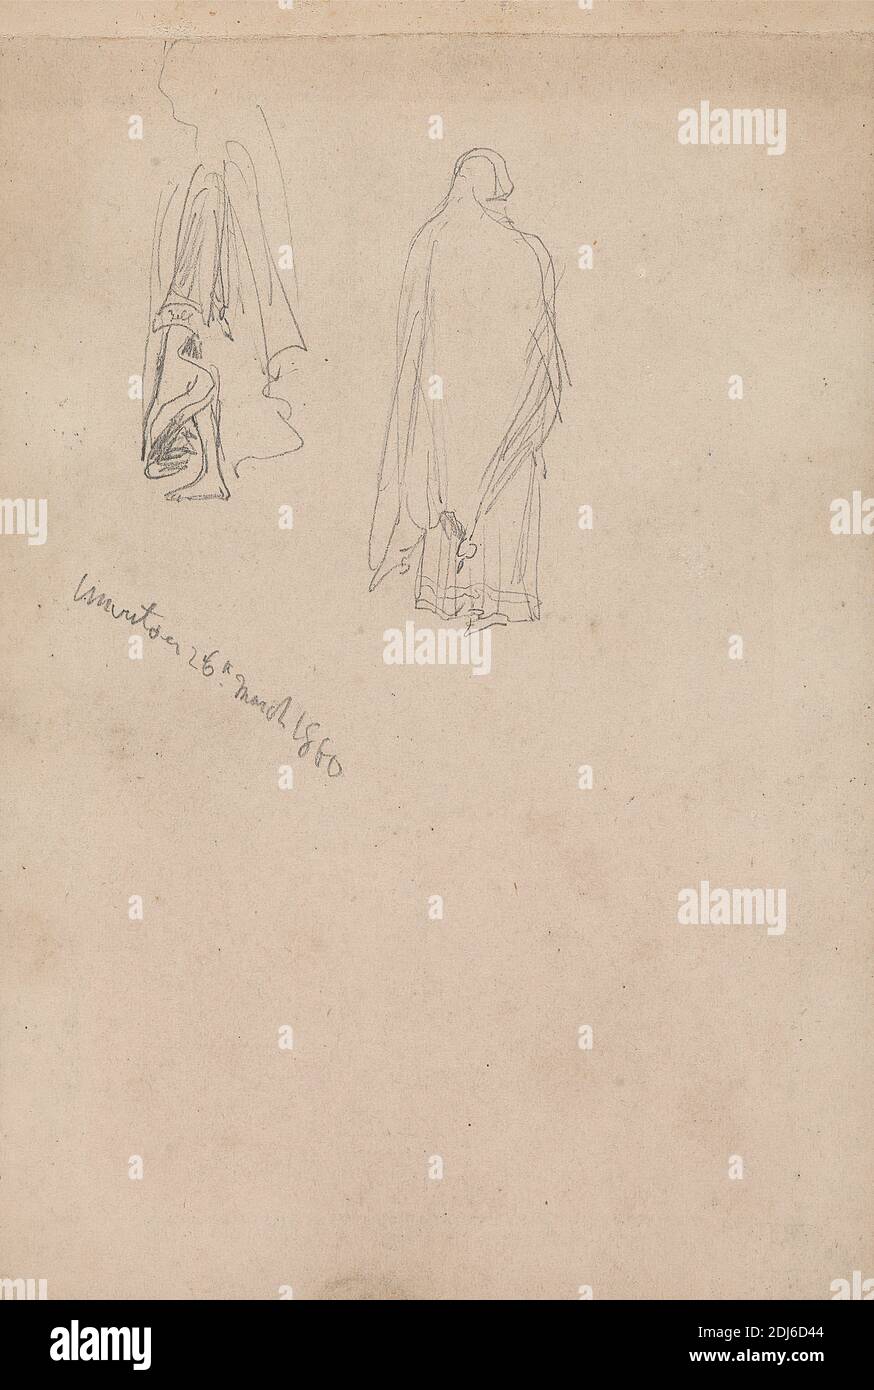 Sketch of Two Female Figures, Amritsar, 26 March 1860, William Simpson, 1823–1899, British, 1860, Graphite on medium, smooth, cream wove paper, Sheet: 4 × 5 7/8 inches (10.2 × 14.9 cm) and Binding: 4 1/4 inches (10.8 cm), animal art, camel (mammal), carriage, figure study, genre subject, horse (animal), Amritsar, India Stock Photo